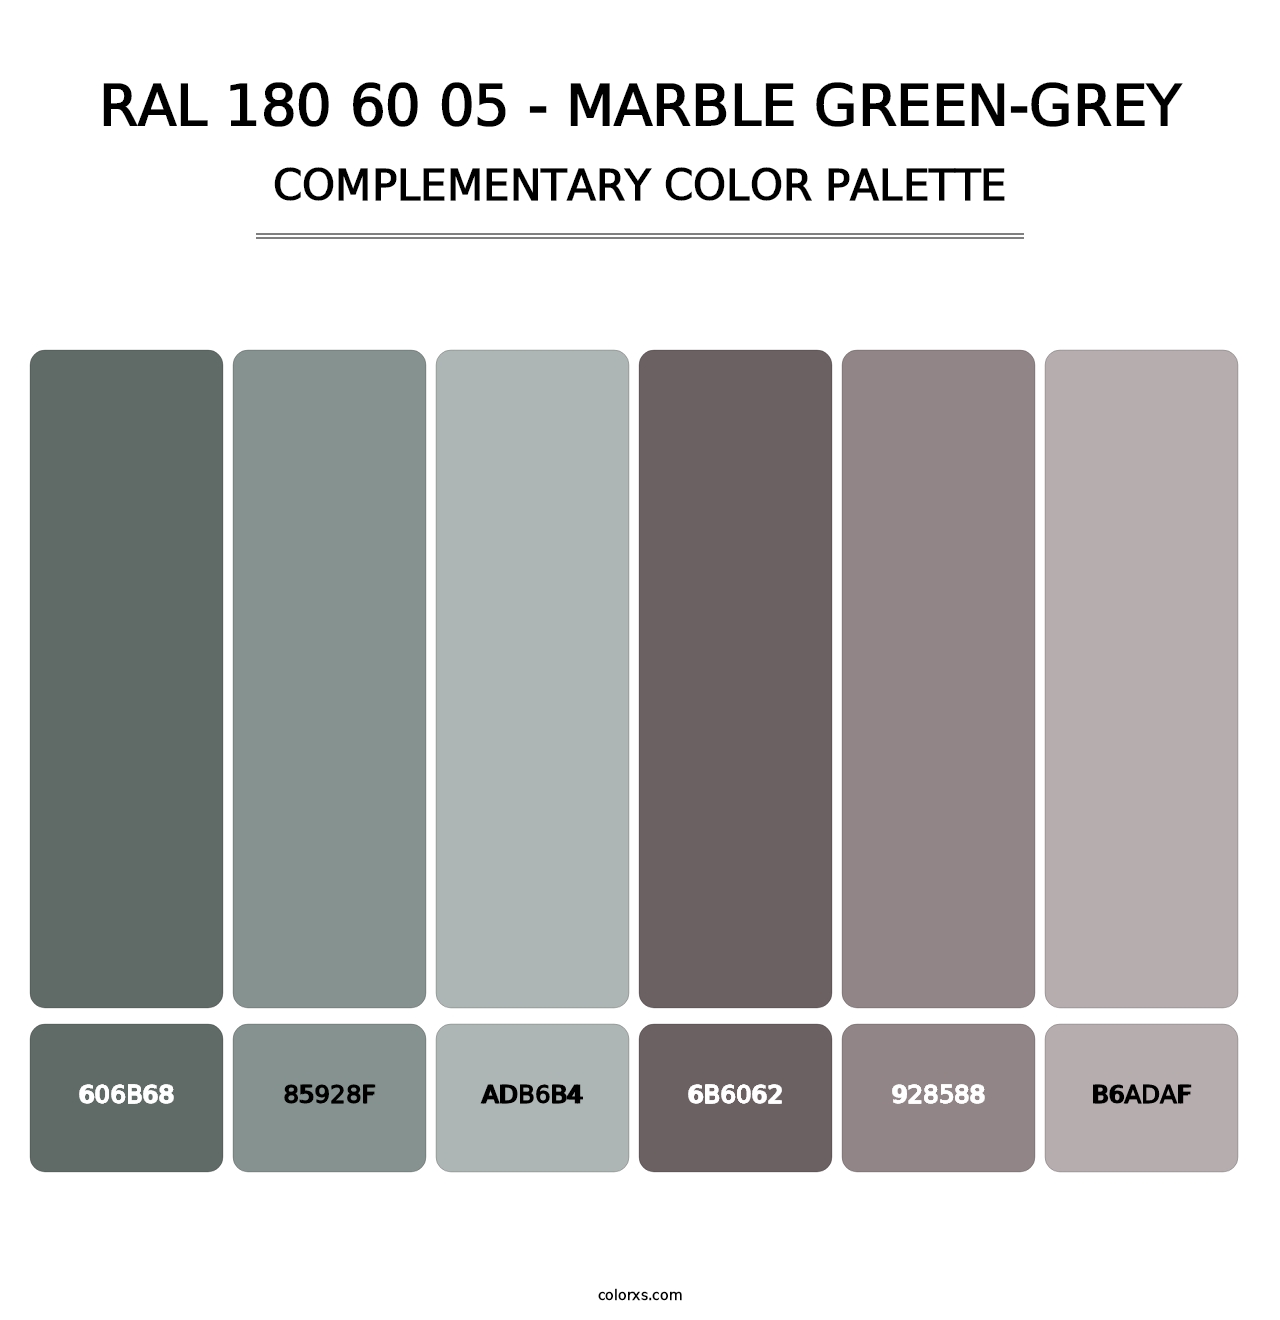 RAL 180 60 05 - Marble Green-Grey - Complementary Color Palette